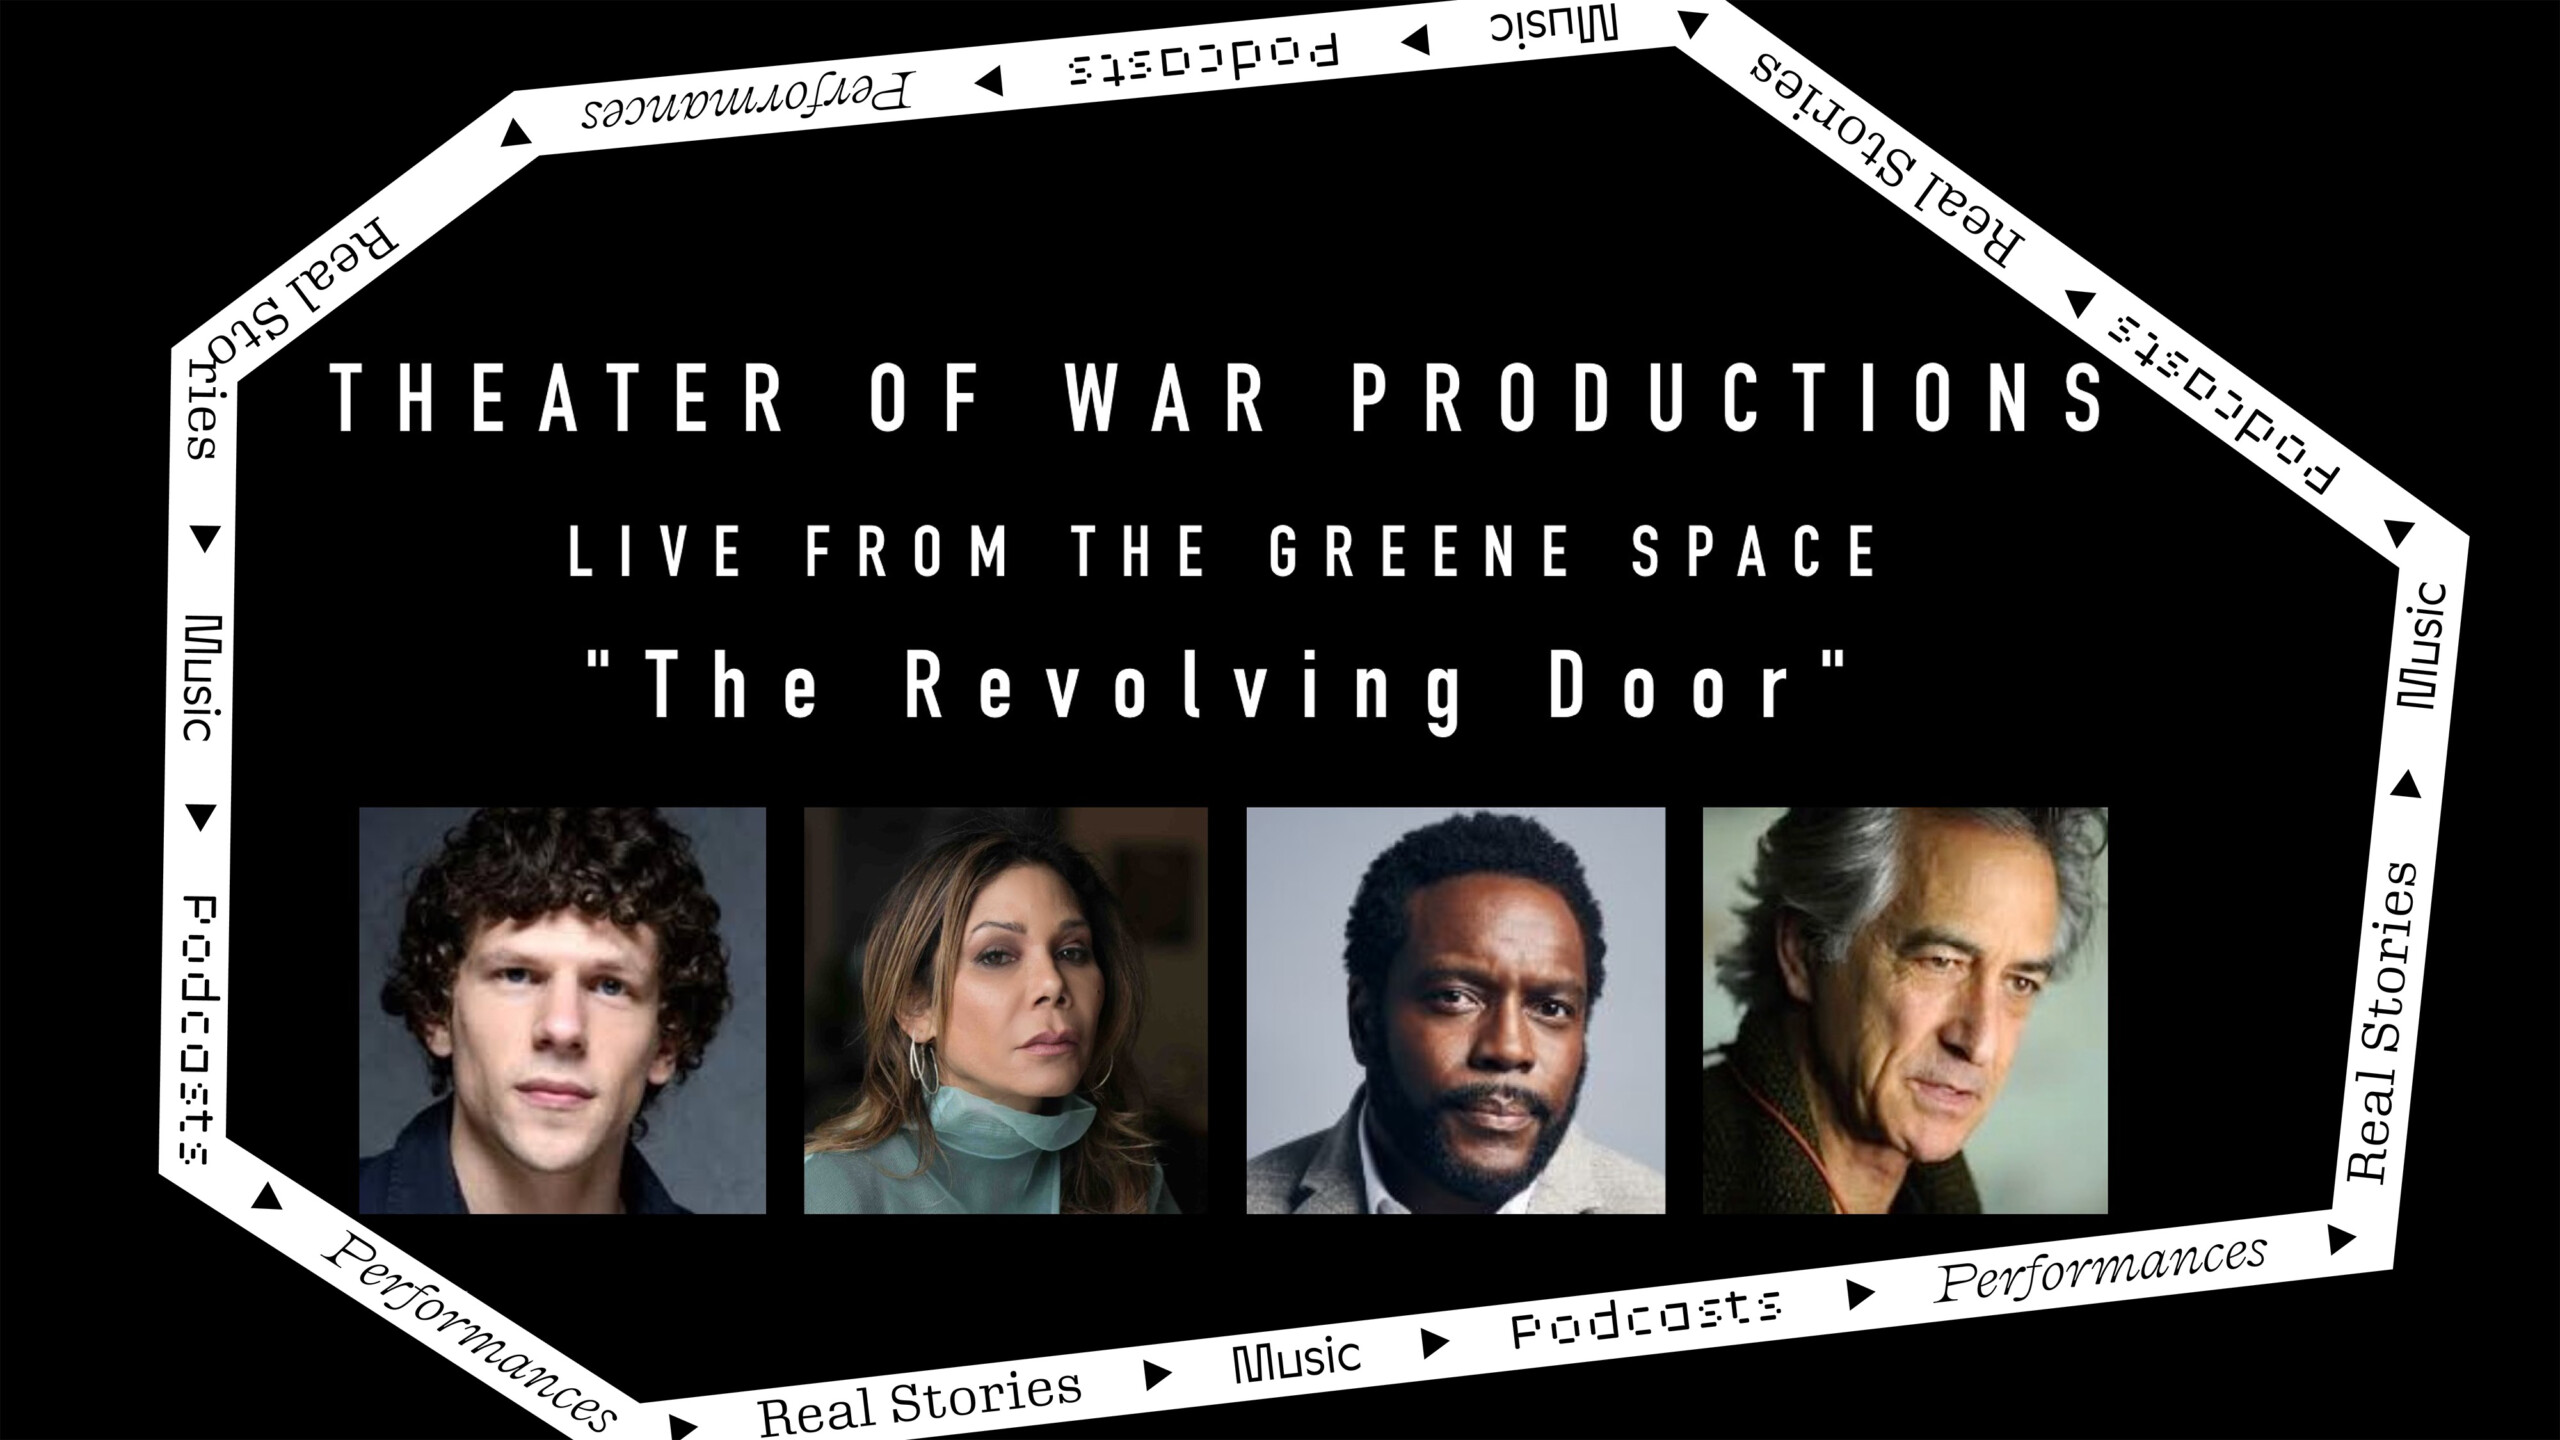 Theater of War Productions: Live from the Greene Space “The Revolving Door”